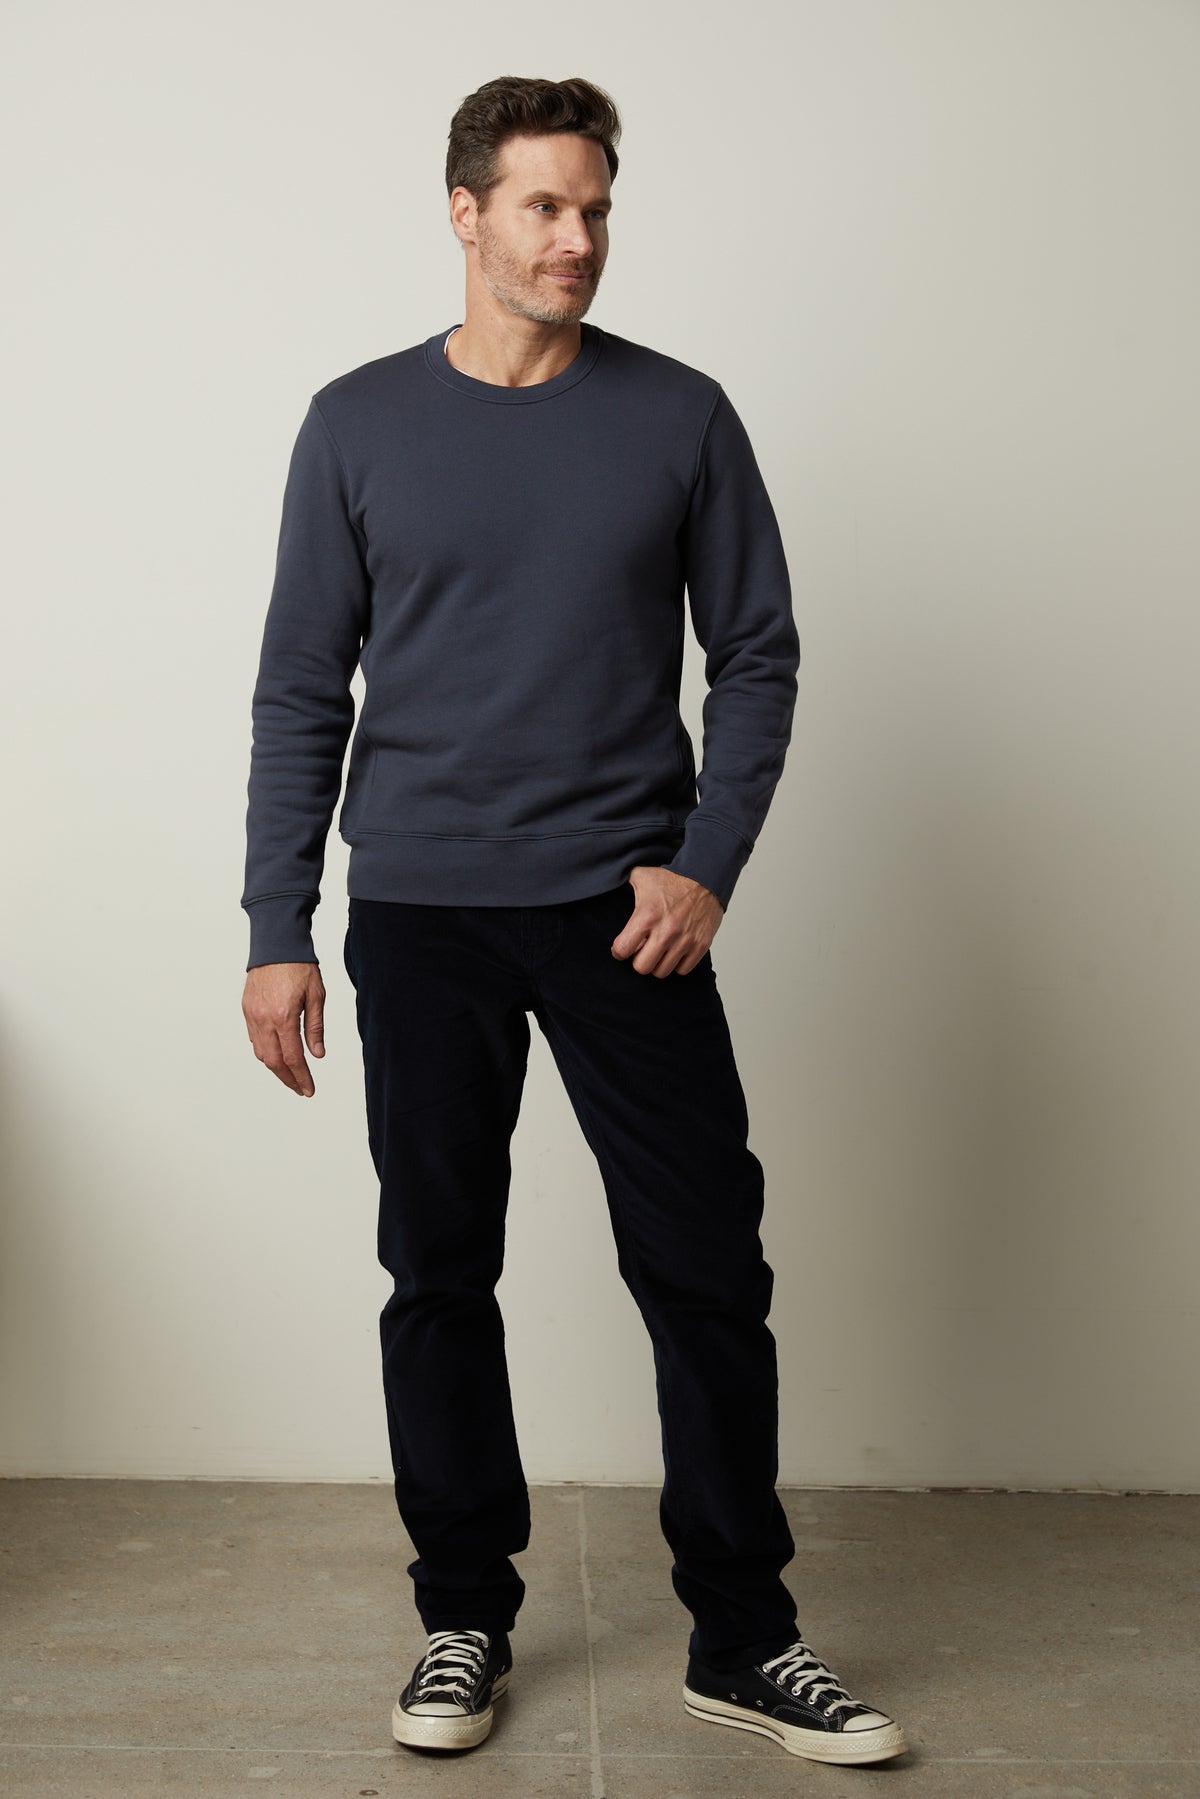   A man standing in a clean room wearing a Velvet by Graham & Spencer KING CREW NECK SWEATSHIRT and pants. 